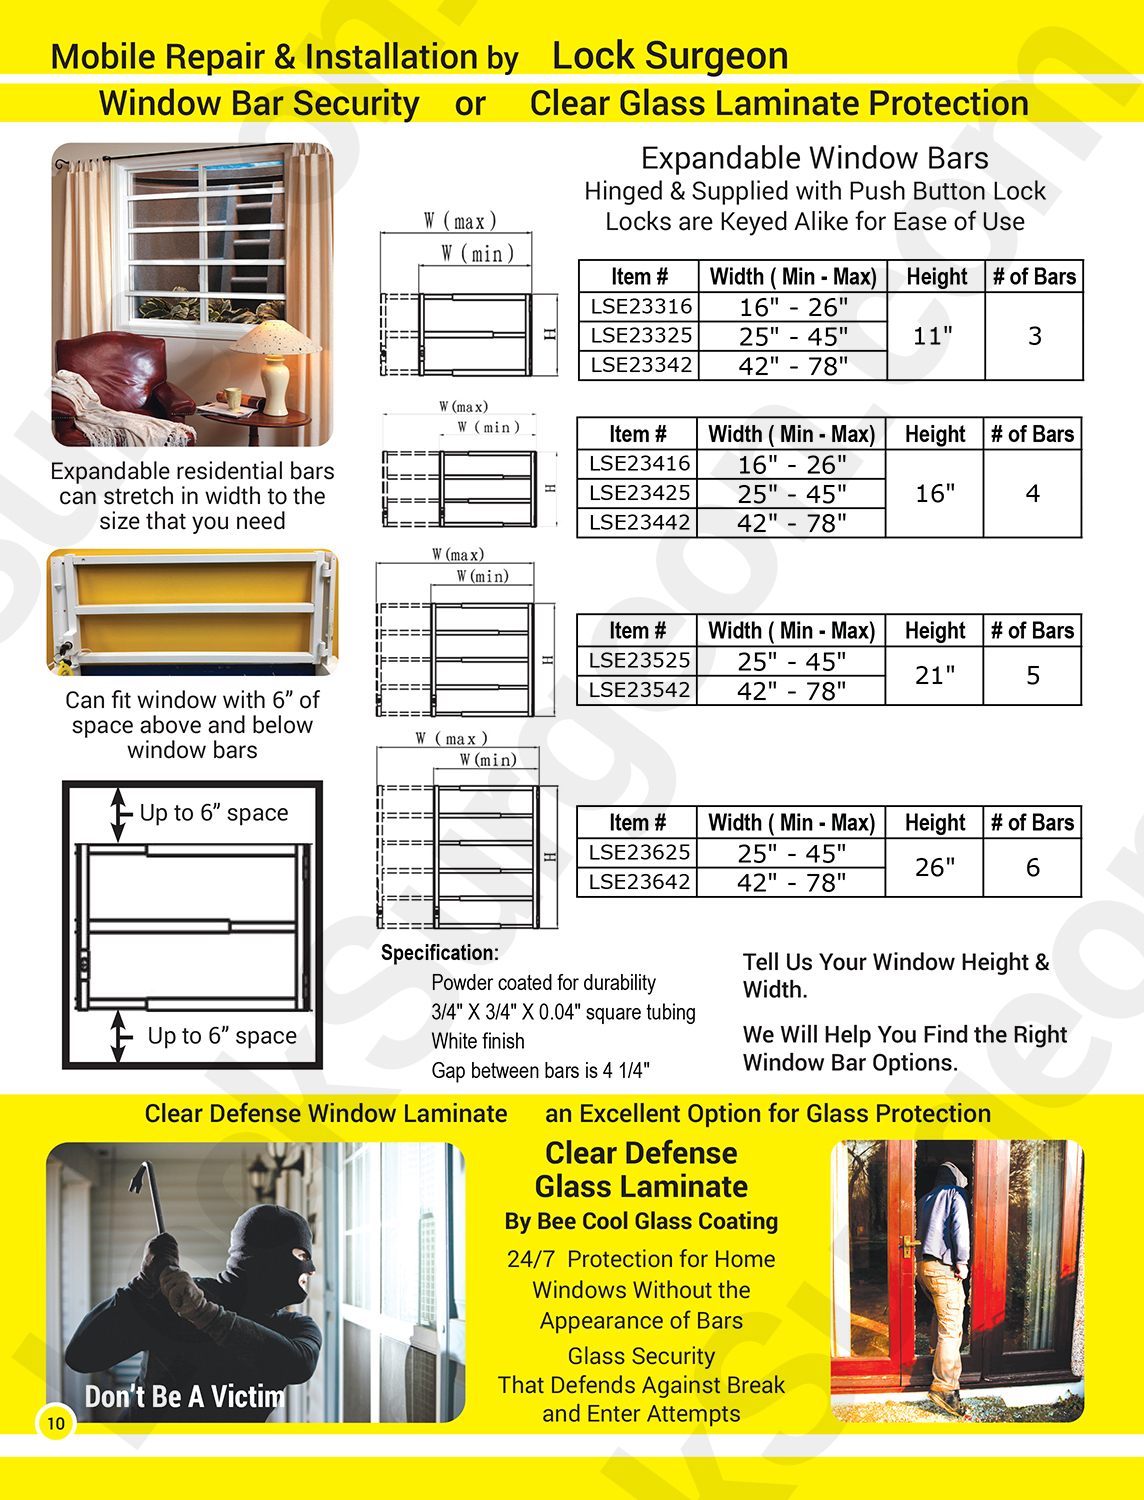 Acheson Expandable window bars for home or business window protection in custom or fixed sizes.